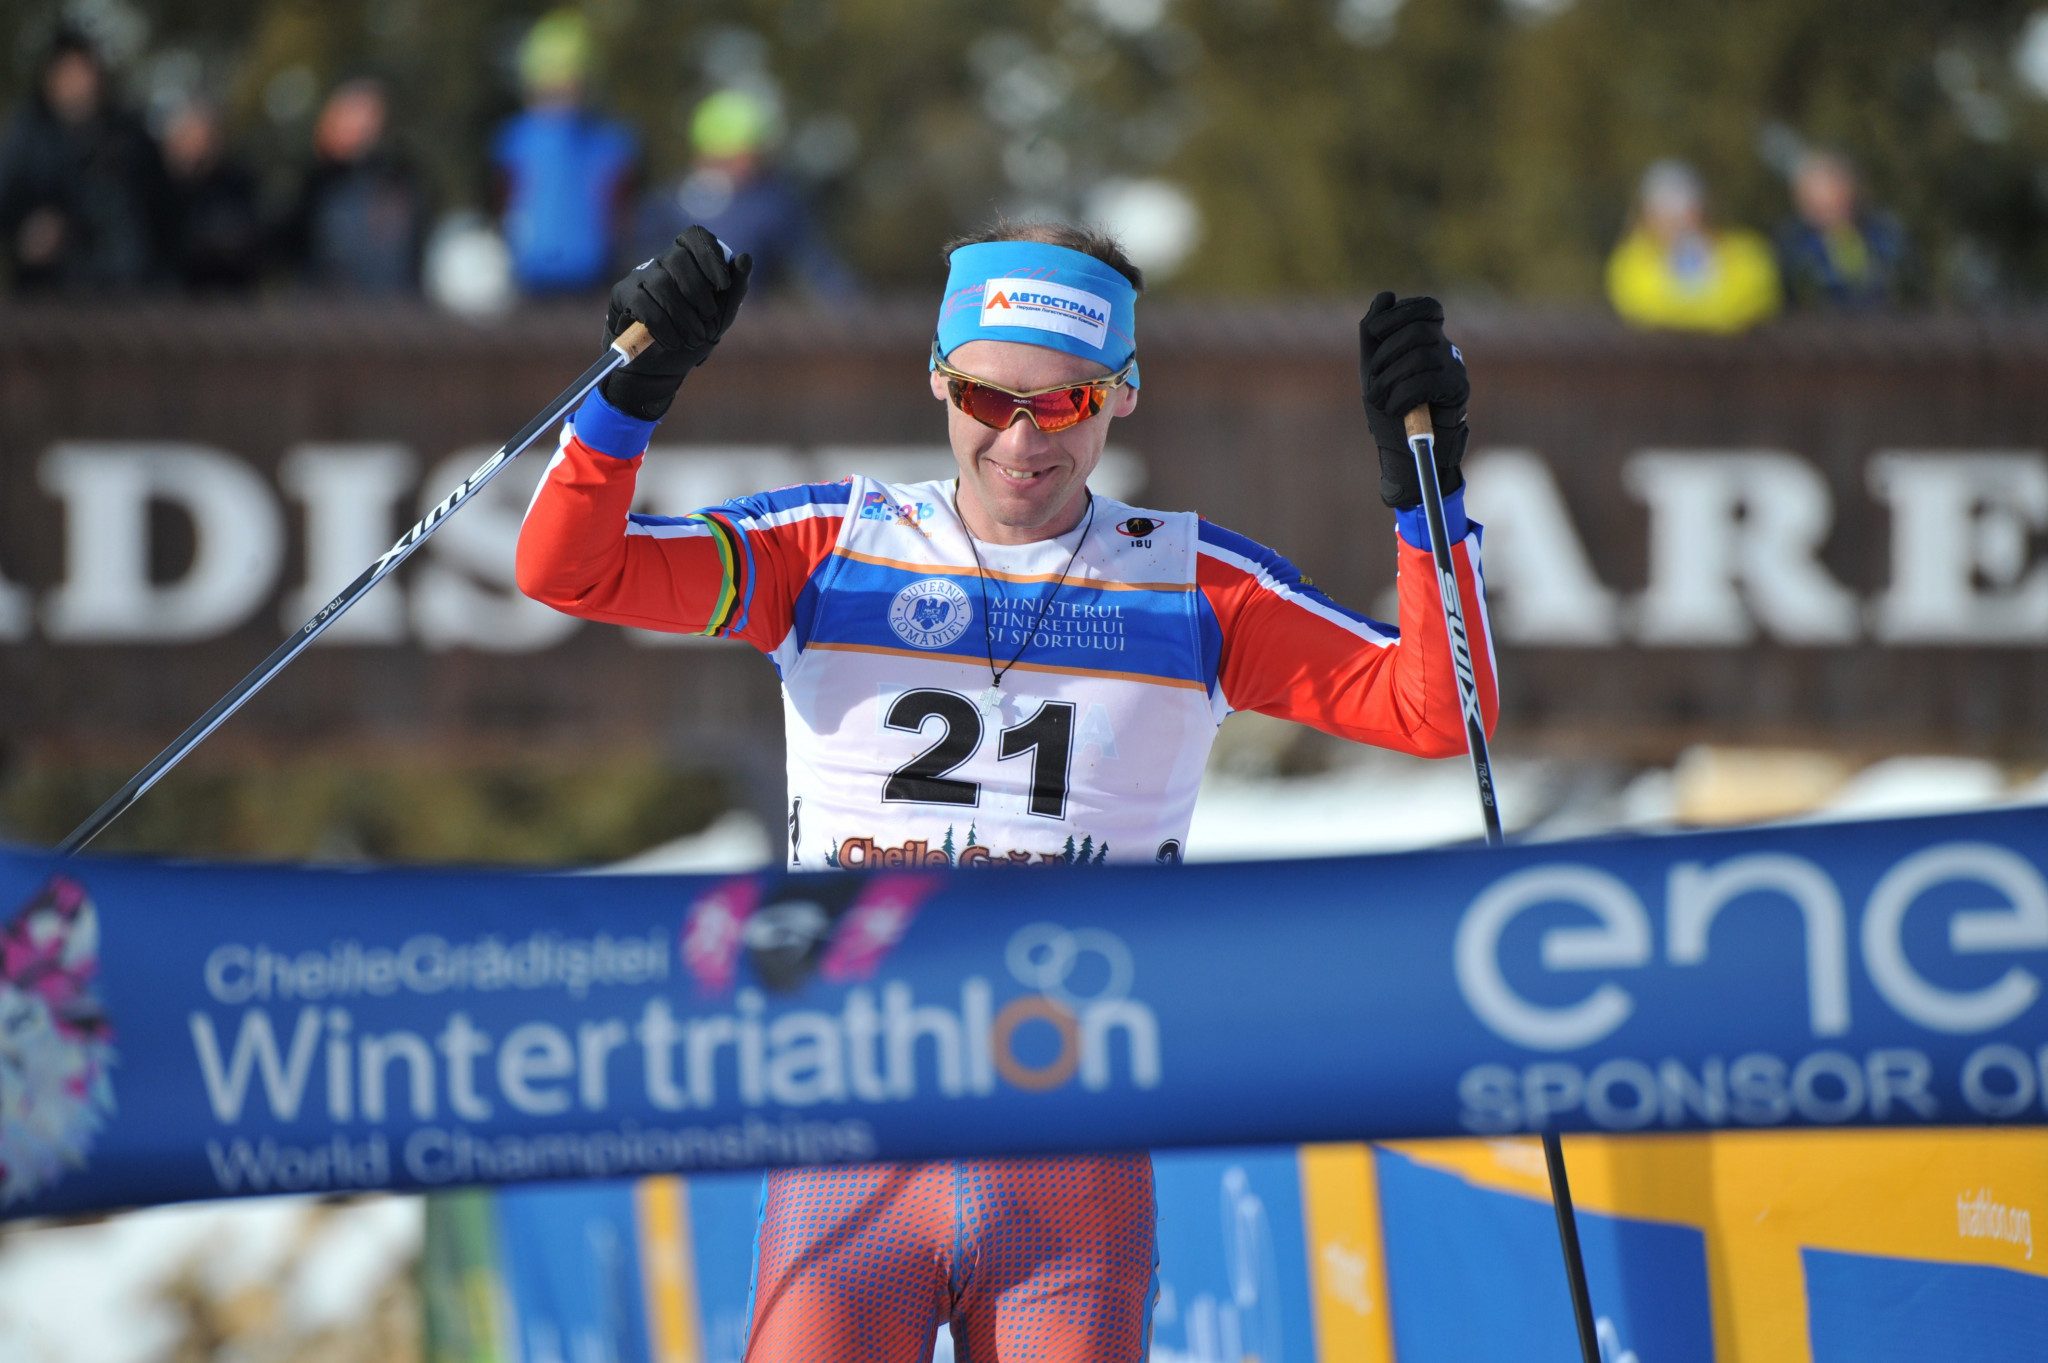 Seven-time world champion and six-time European champion Pavel Andreev is favourite to win the men's event at the ETU Winter Triathlon European Championships ©Getty Images